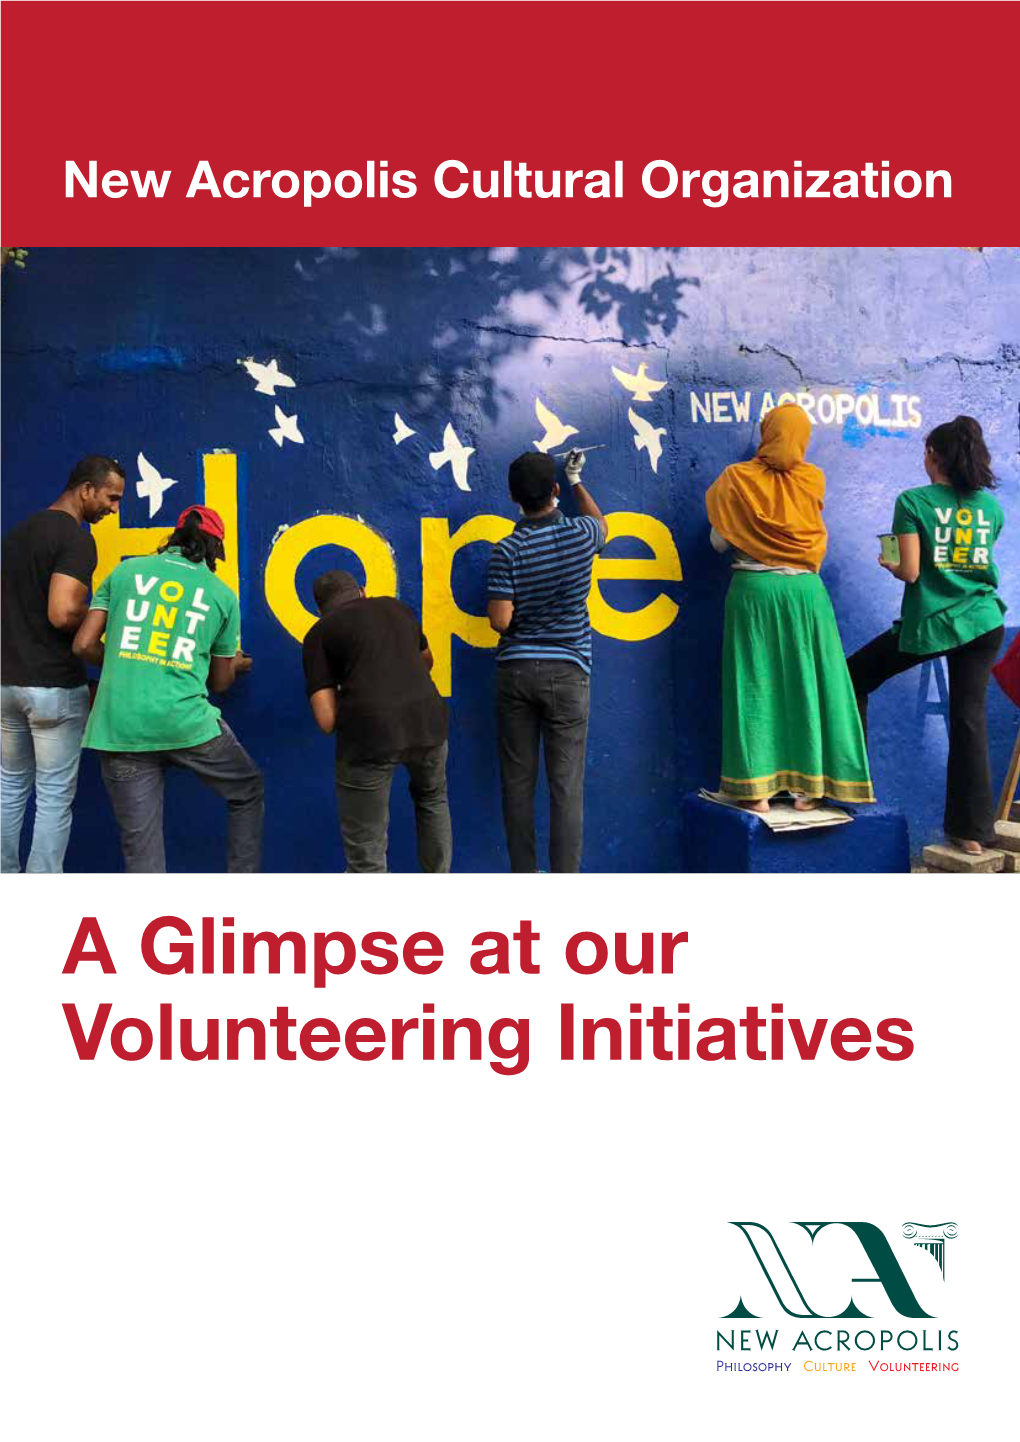 A Glimpse at Our Volunteering Initiatives